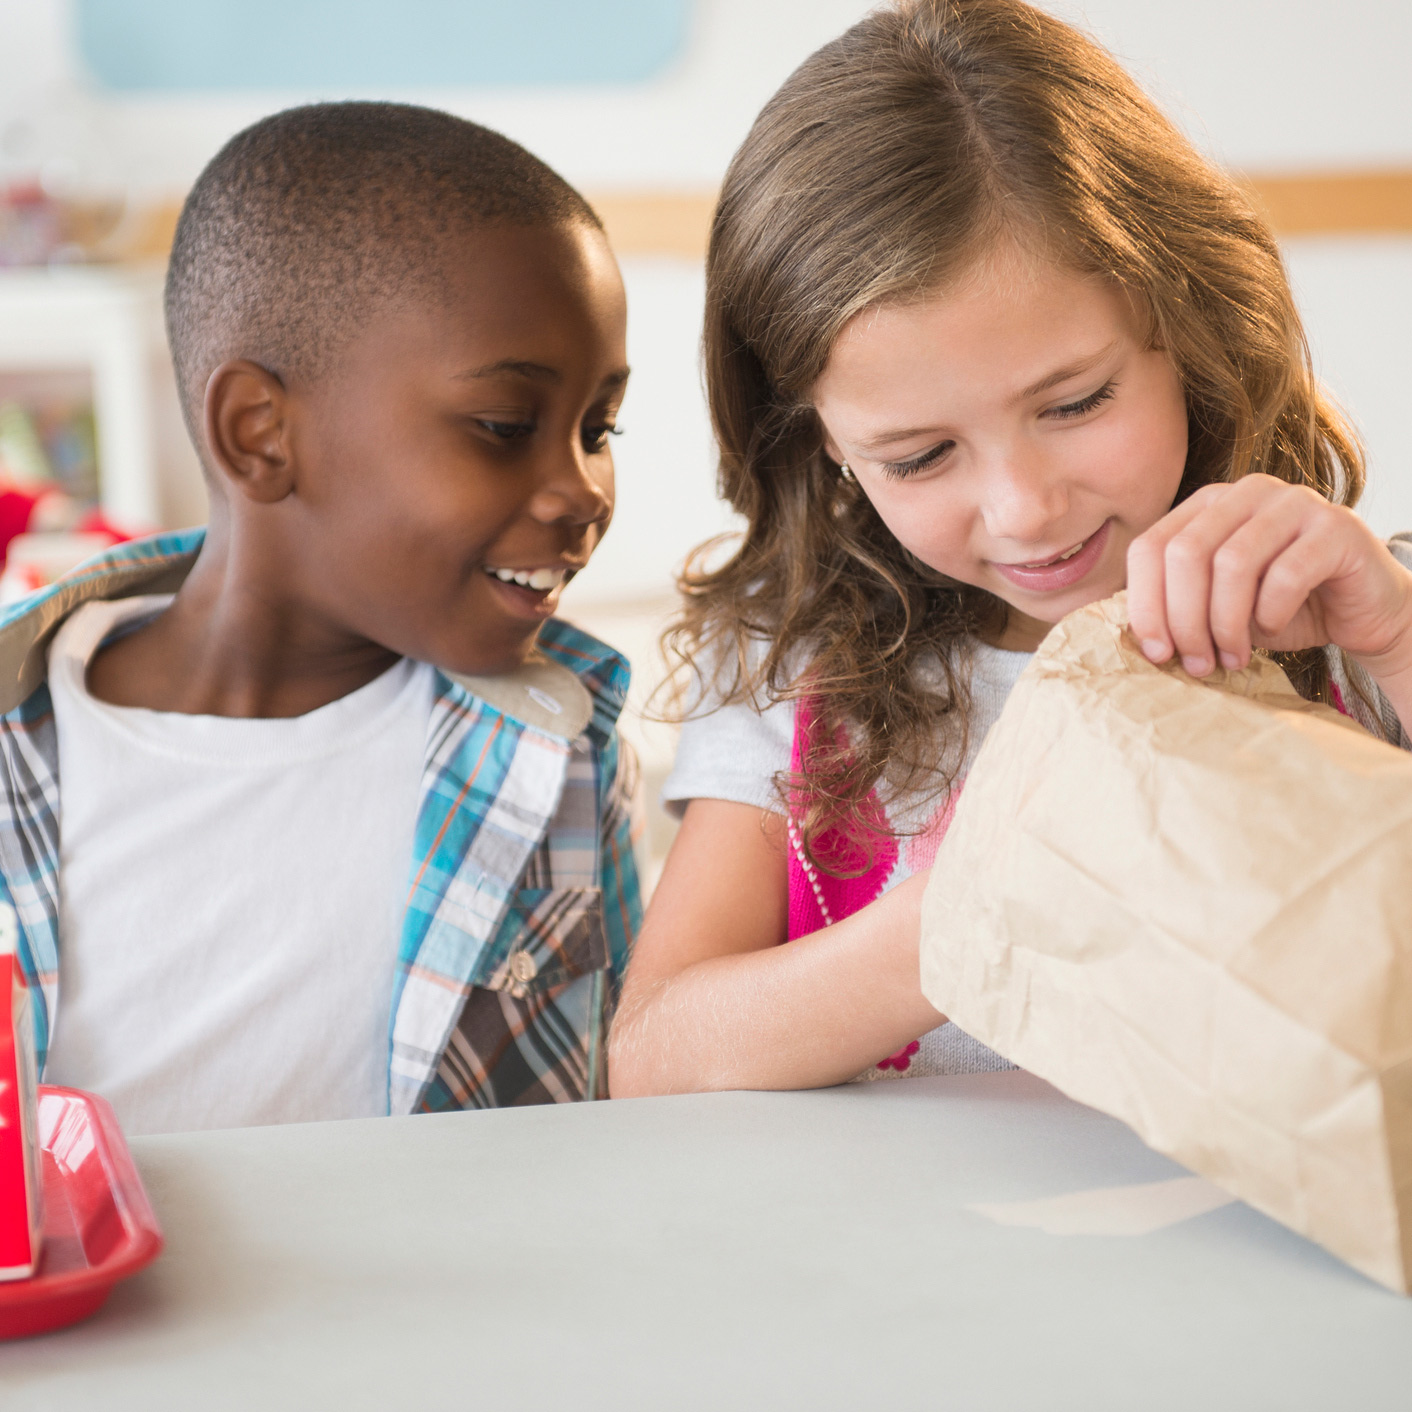 how to pack a healthy school lunch